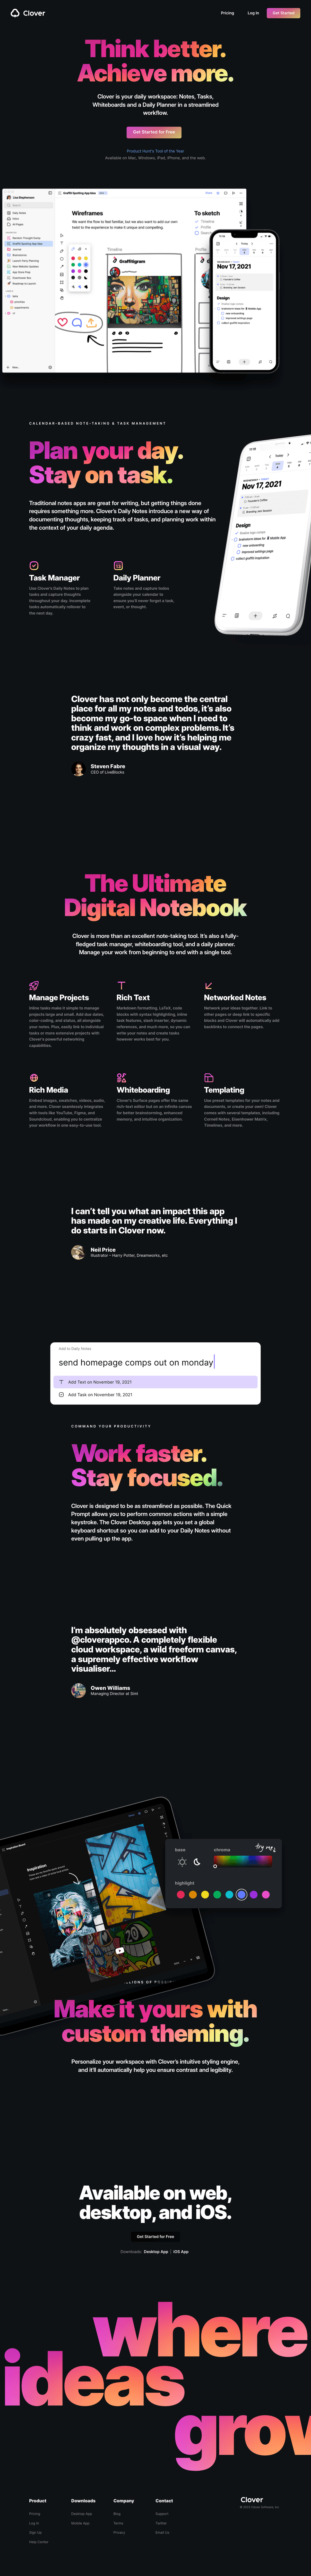 Full page screenshot of https://cloverapp.com/ landing page.